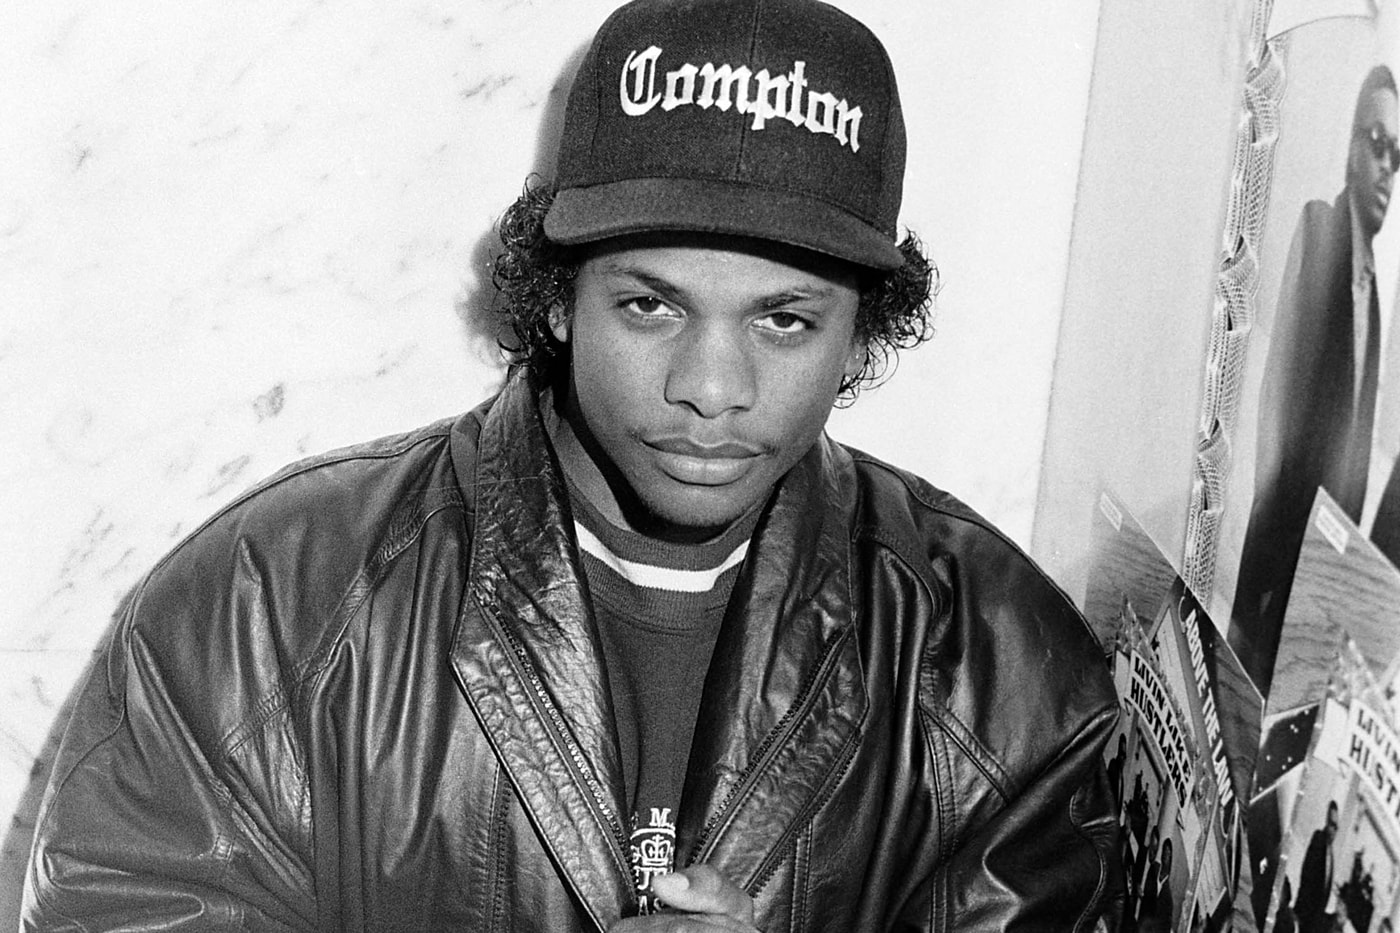 Compton Street Renamed In Honor of Eazy-E 100 block Auto Drive South